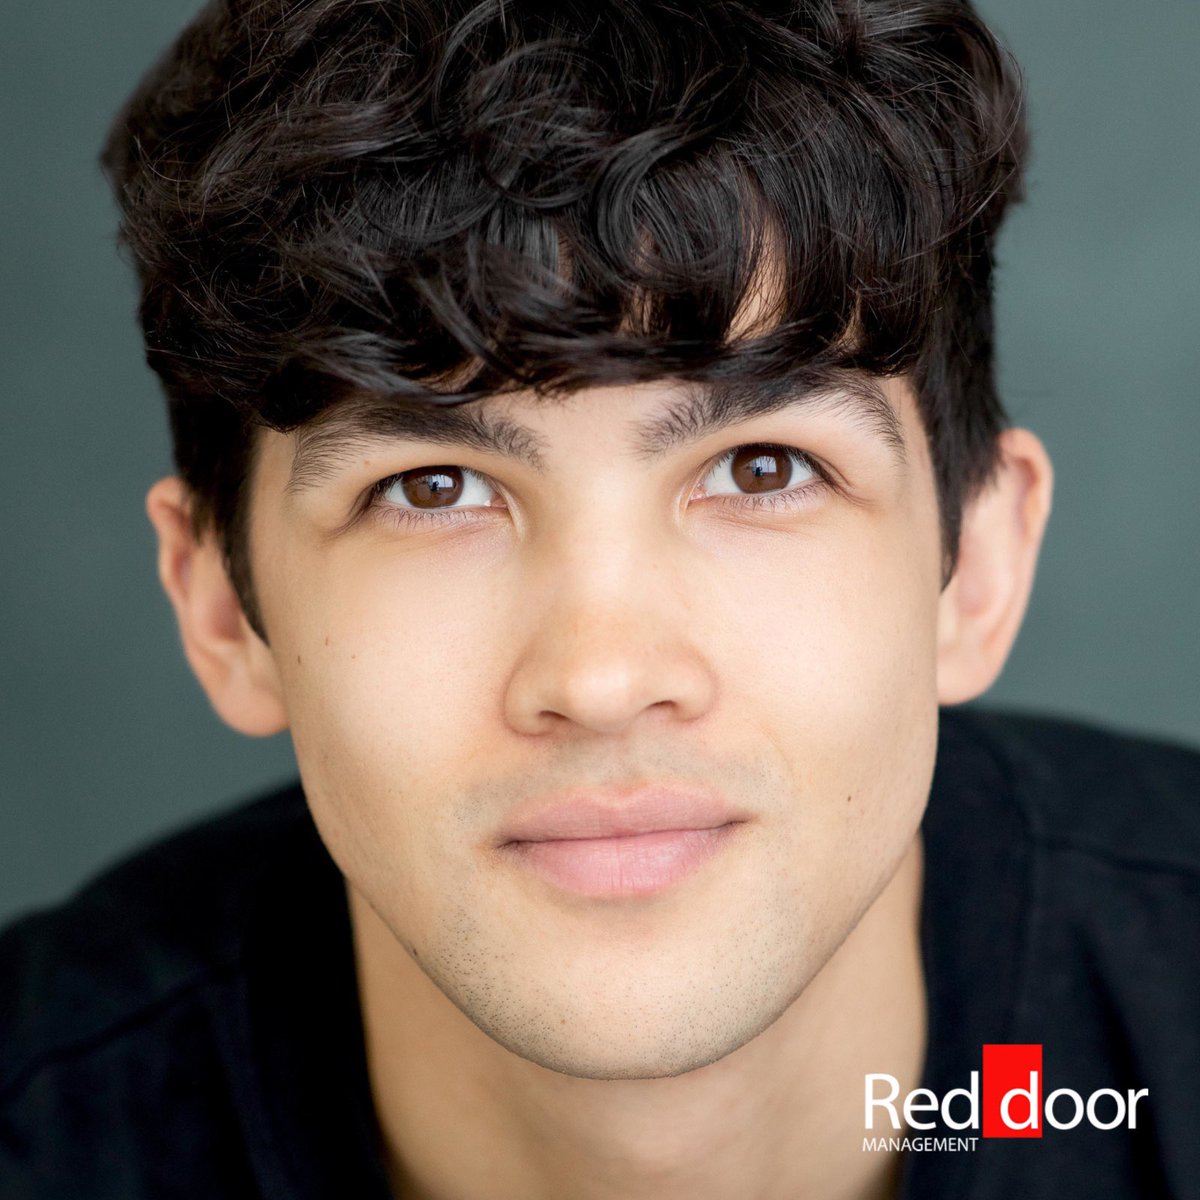 Red Door’s JUSTIN KENDAL-SADIQ has been busy this weekend in Europe filming for a major brand campaign🎬 

#commercial #campaign #europe #reddoormanagement #filming #brand